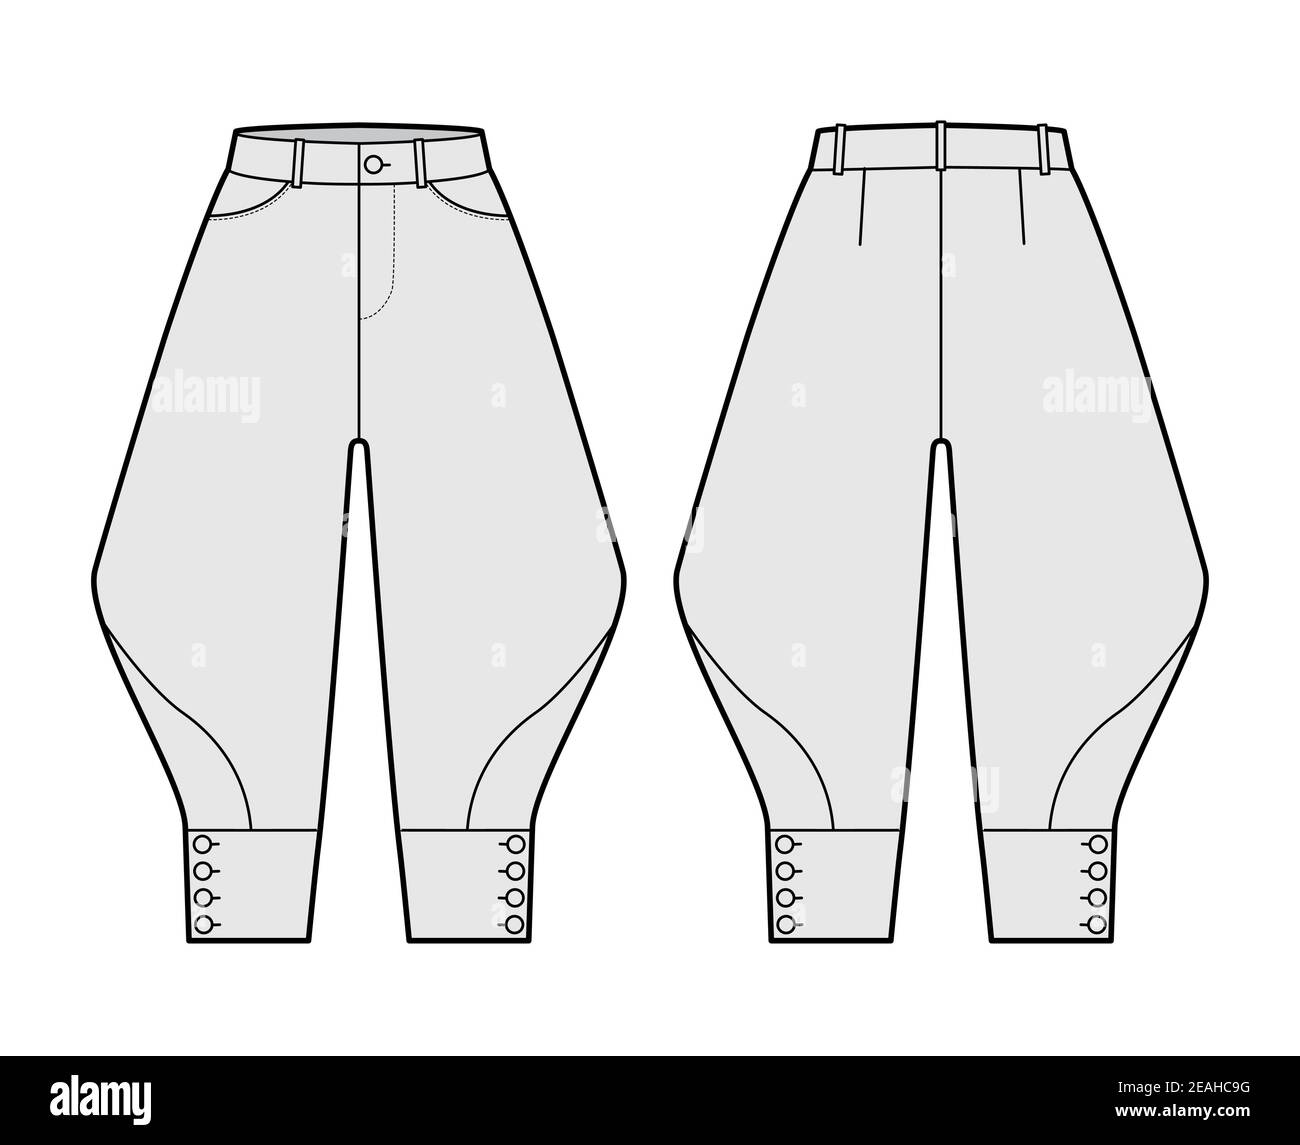 Riding breeches short pants technical fashion illustration with knee ...